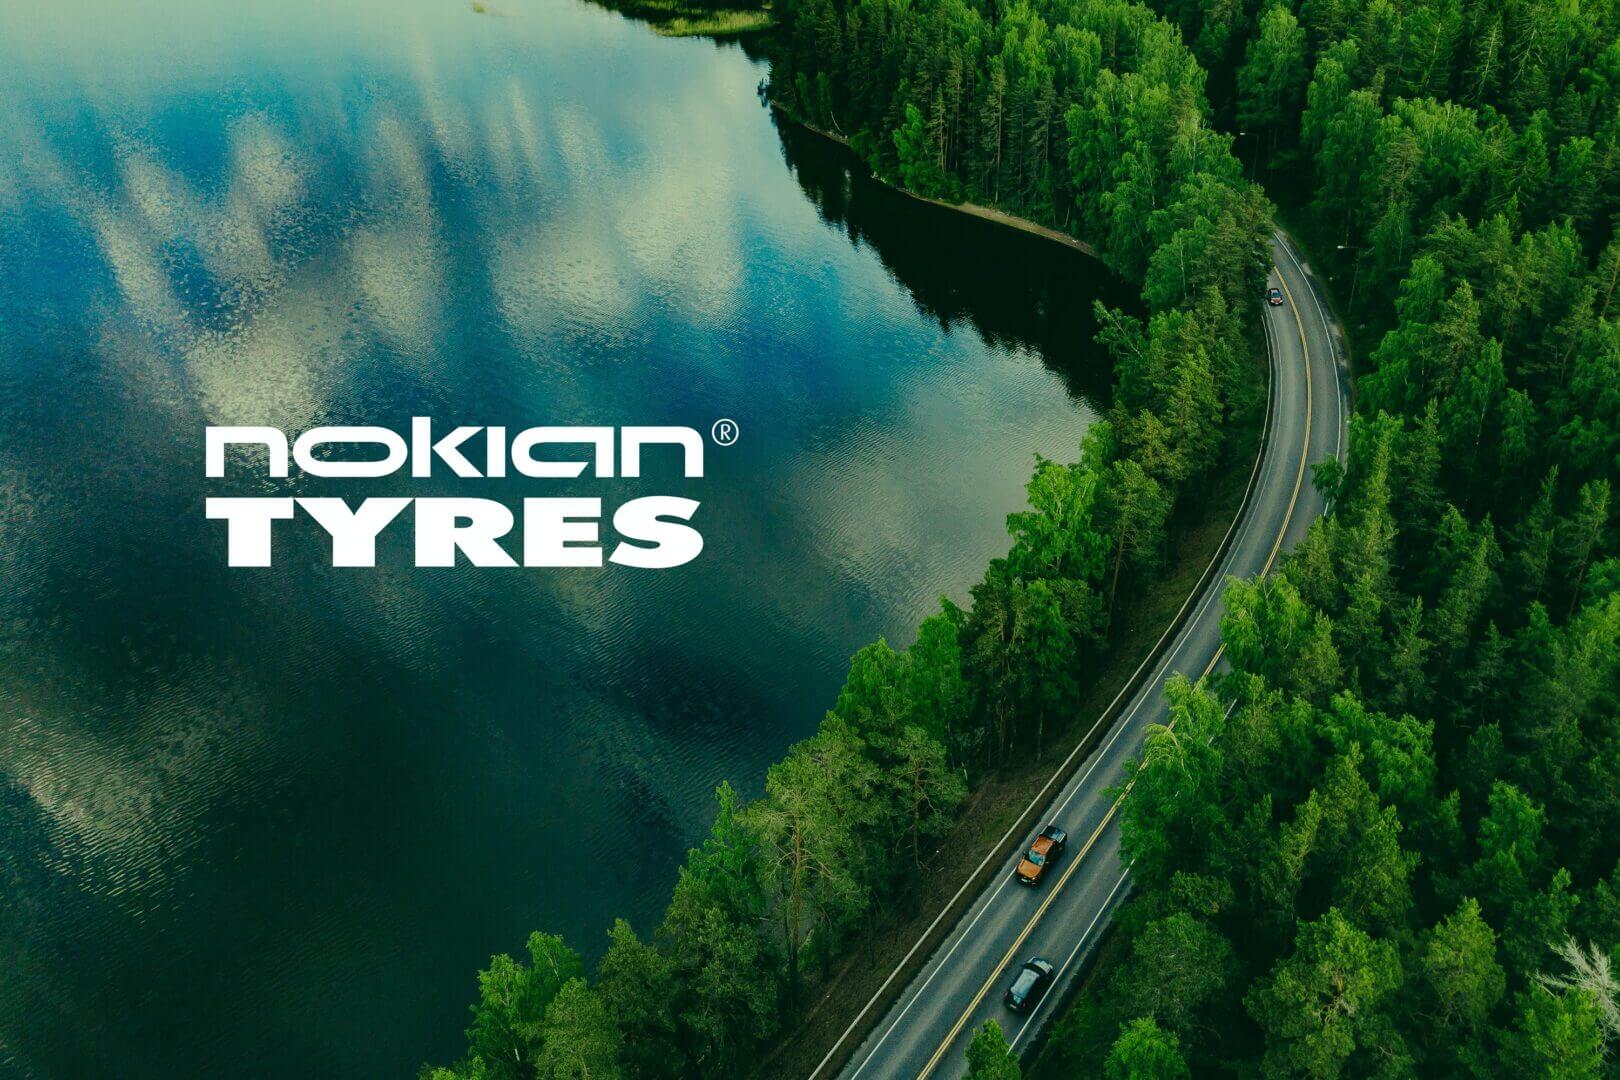 Ariel view of lake, woods and road with text "Nokian Tyres"